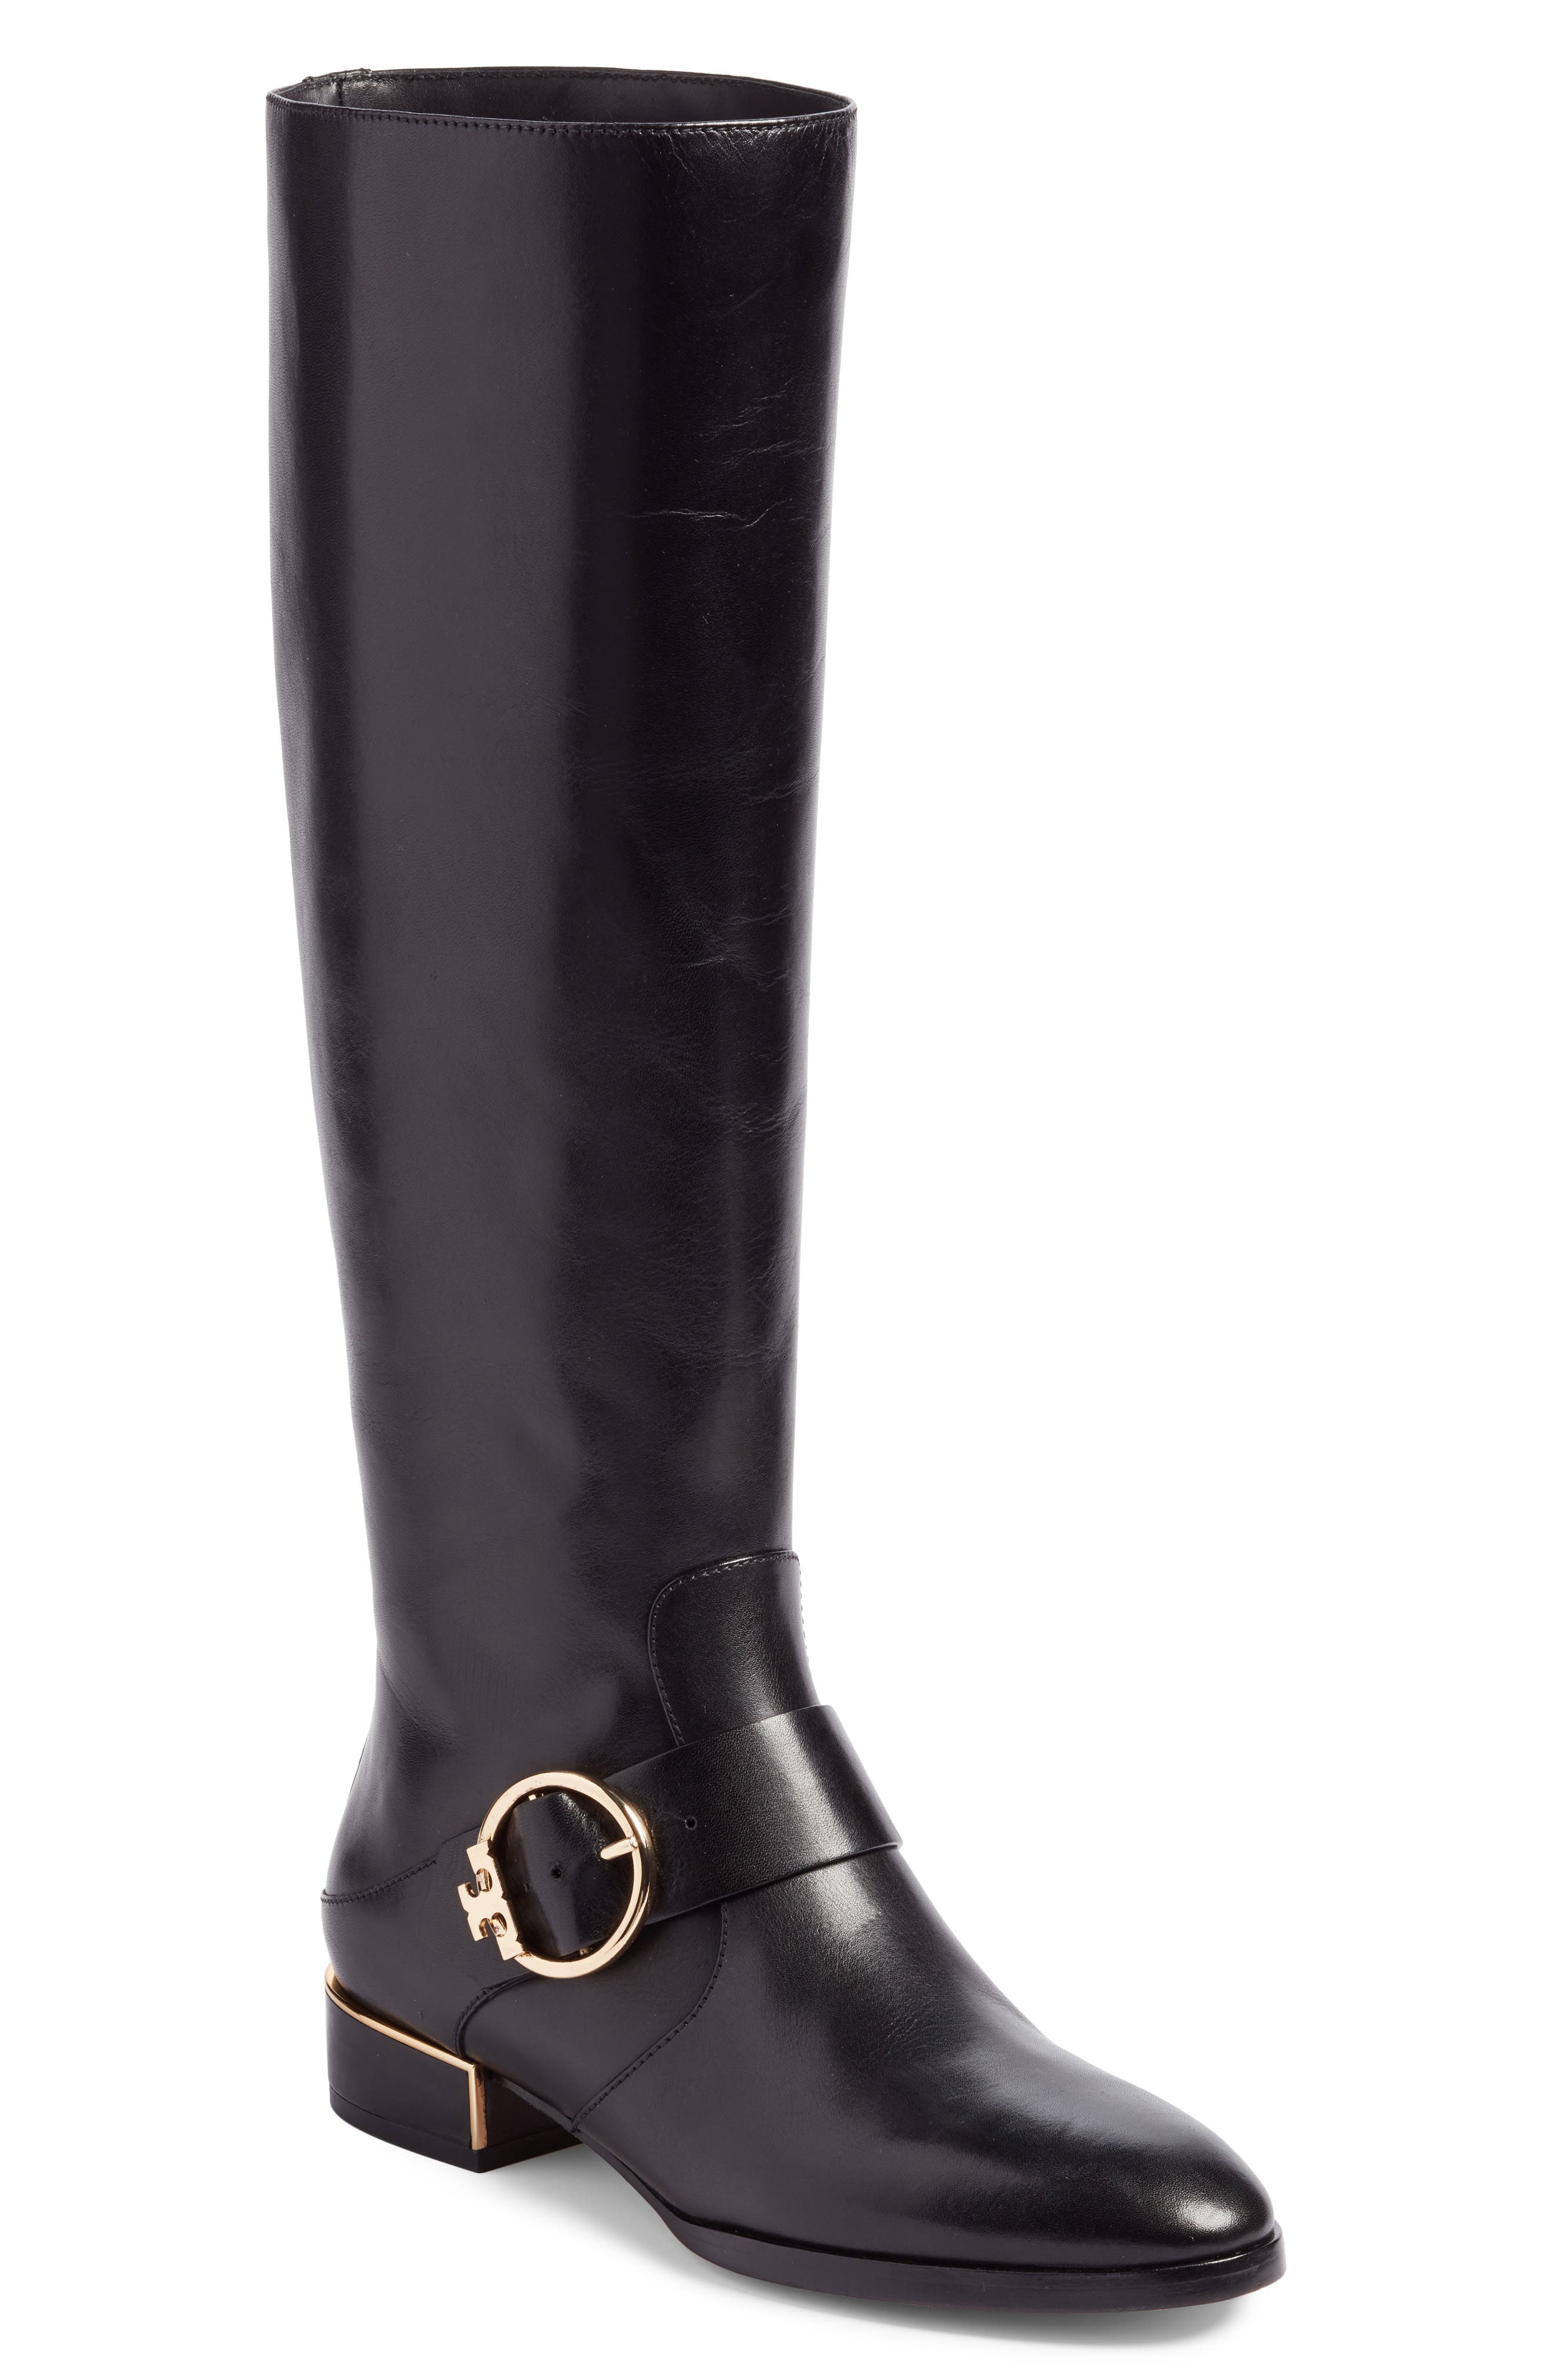 tory burch boots nordstrom rack